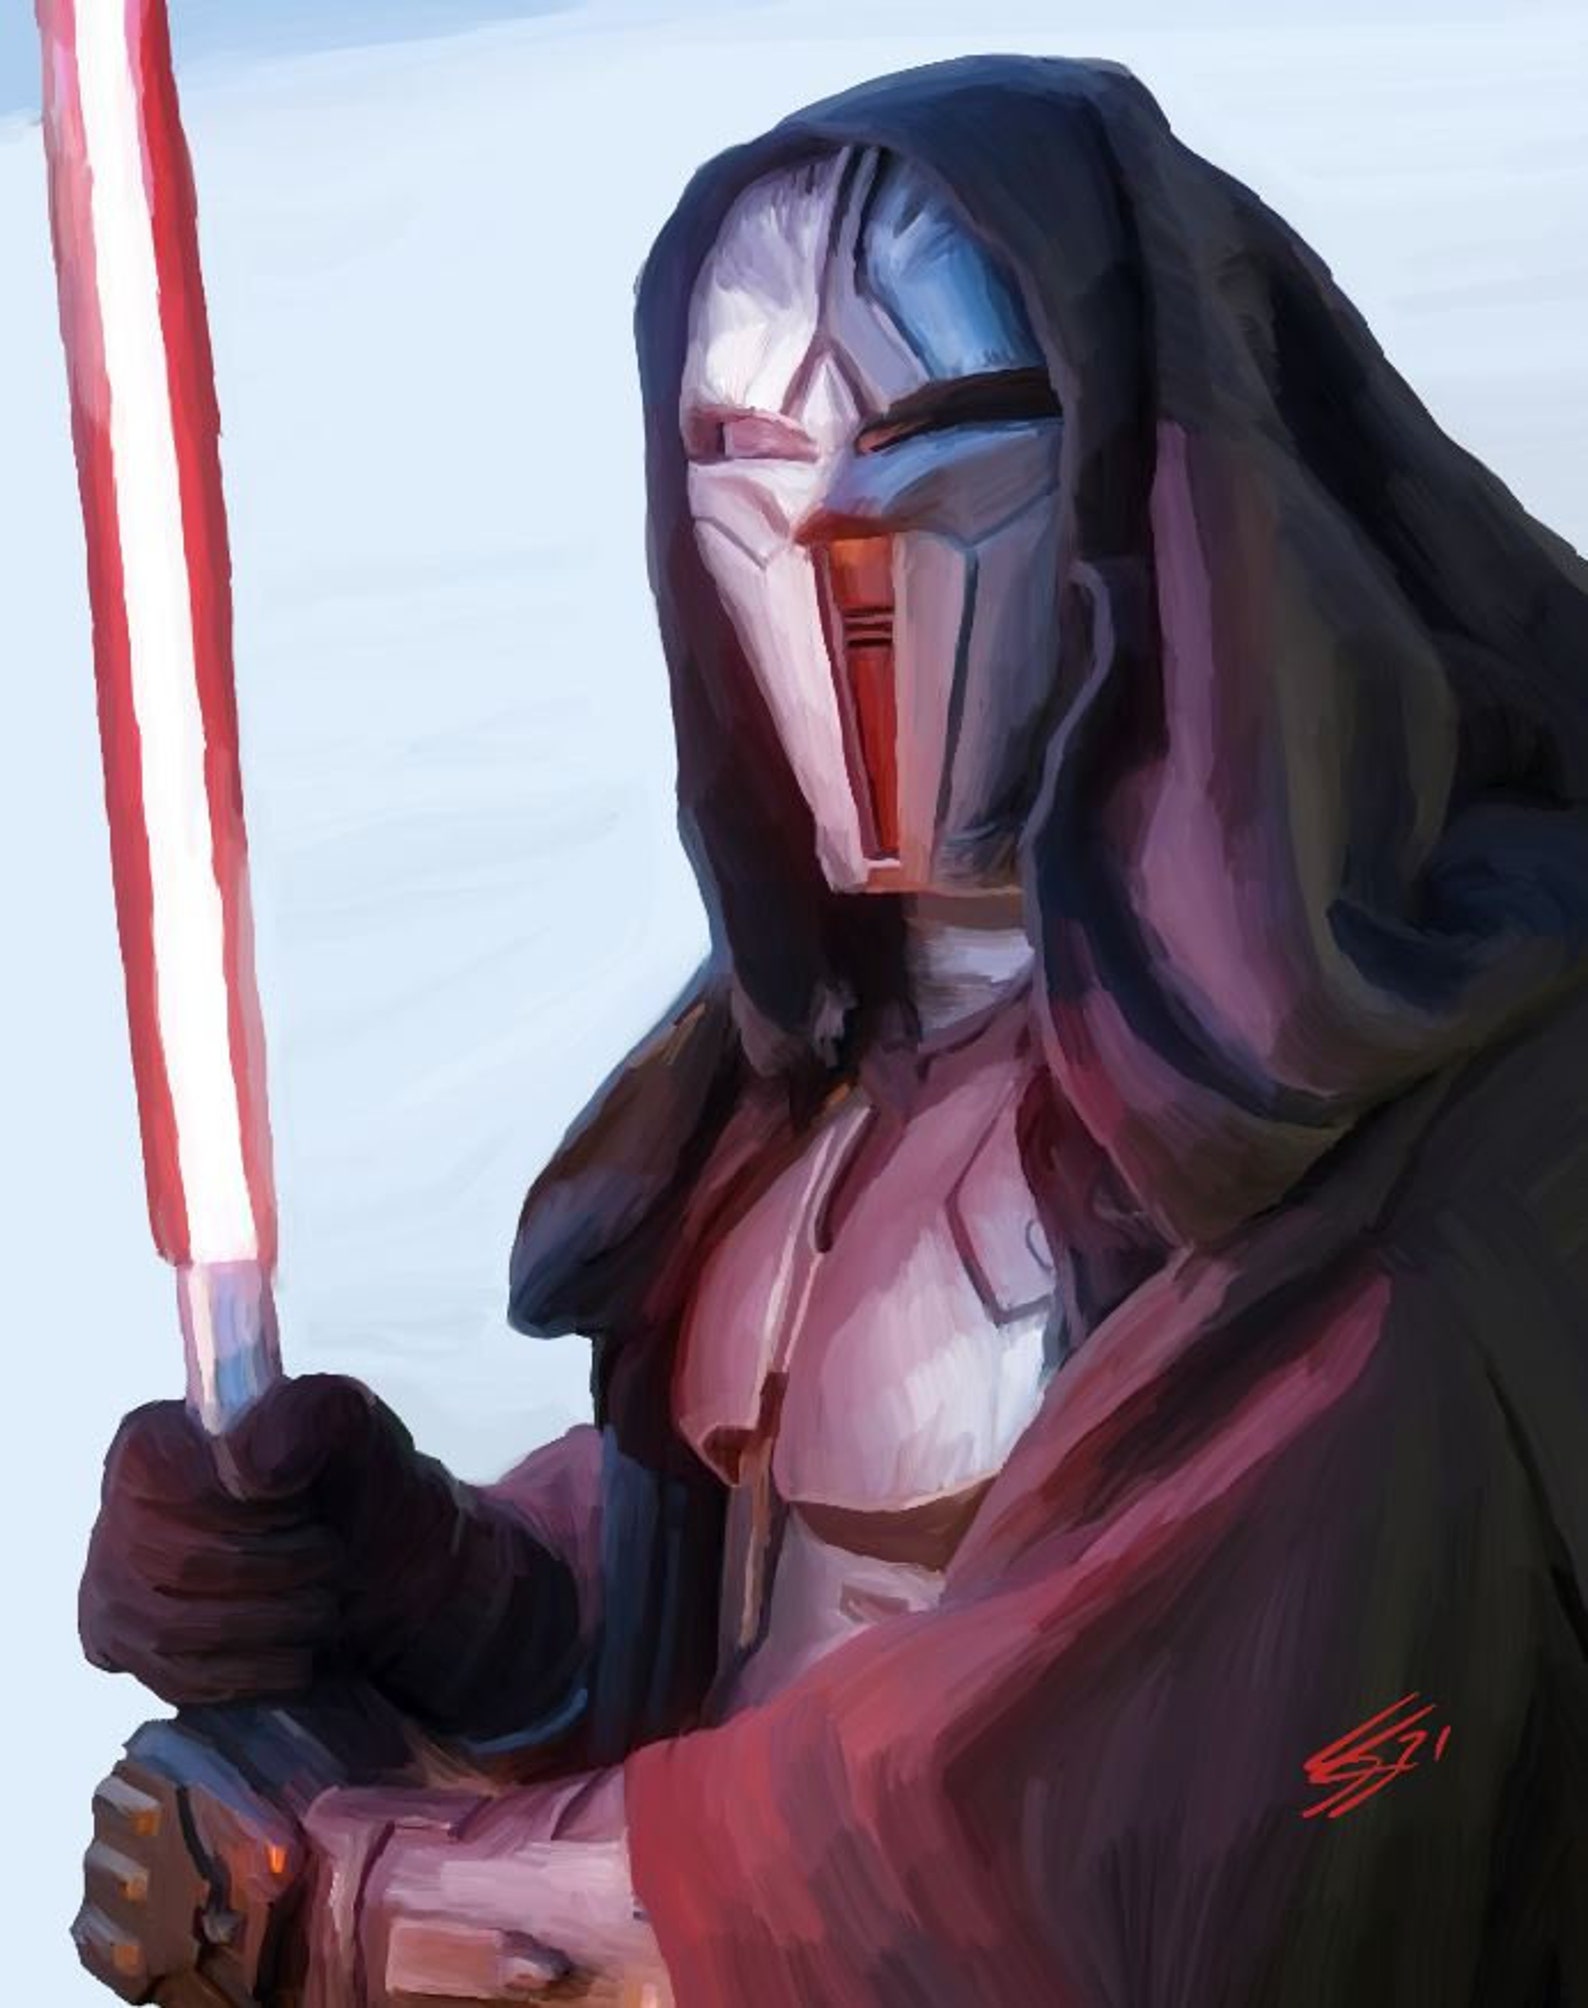 Decoding The Dark Side: Revealing The Identity Of The Acolyte's Sith